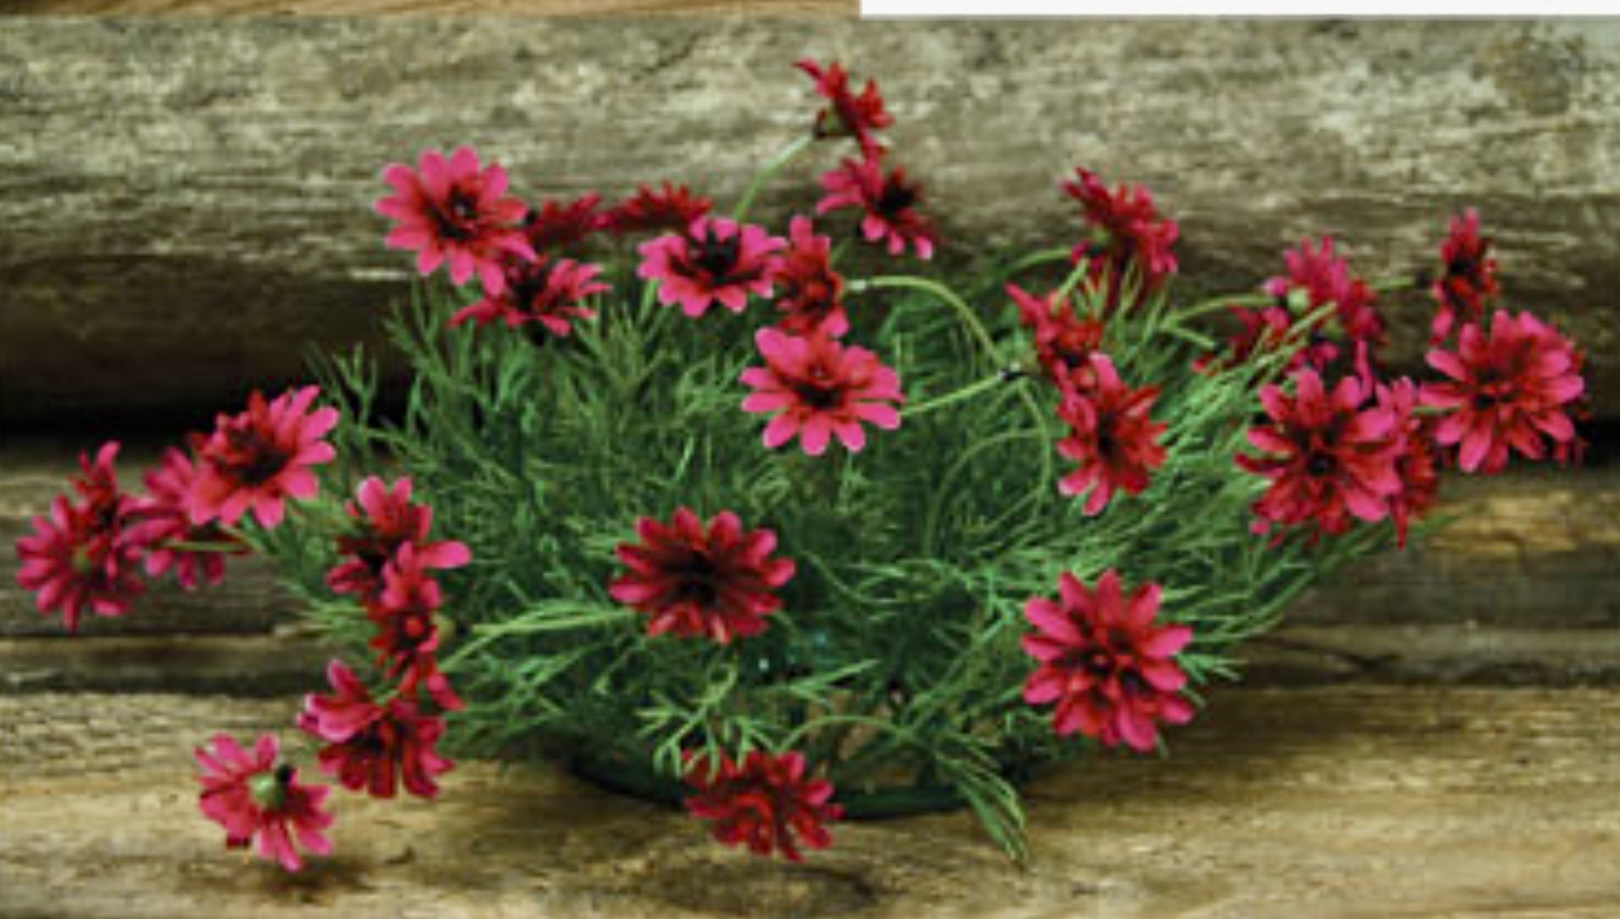 The star daisy ring features bright cerise pink flowers with greenery and wispy leaves.  The ring is perfect for accenting pillars and candle holders or even just sitting  by itself on a table.  This ring measures 3 inches inner diameter and 6 inches outer diameter.  This sweet candle ring is a perfect addition to your spring decor